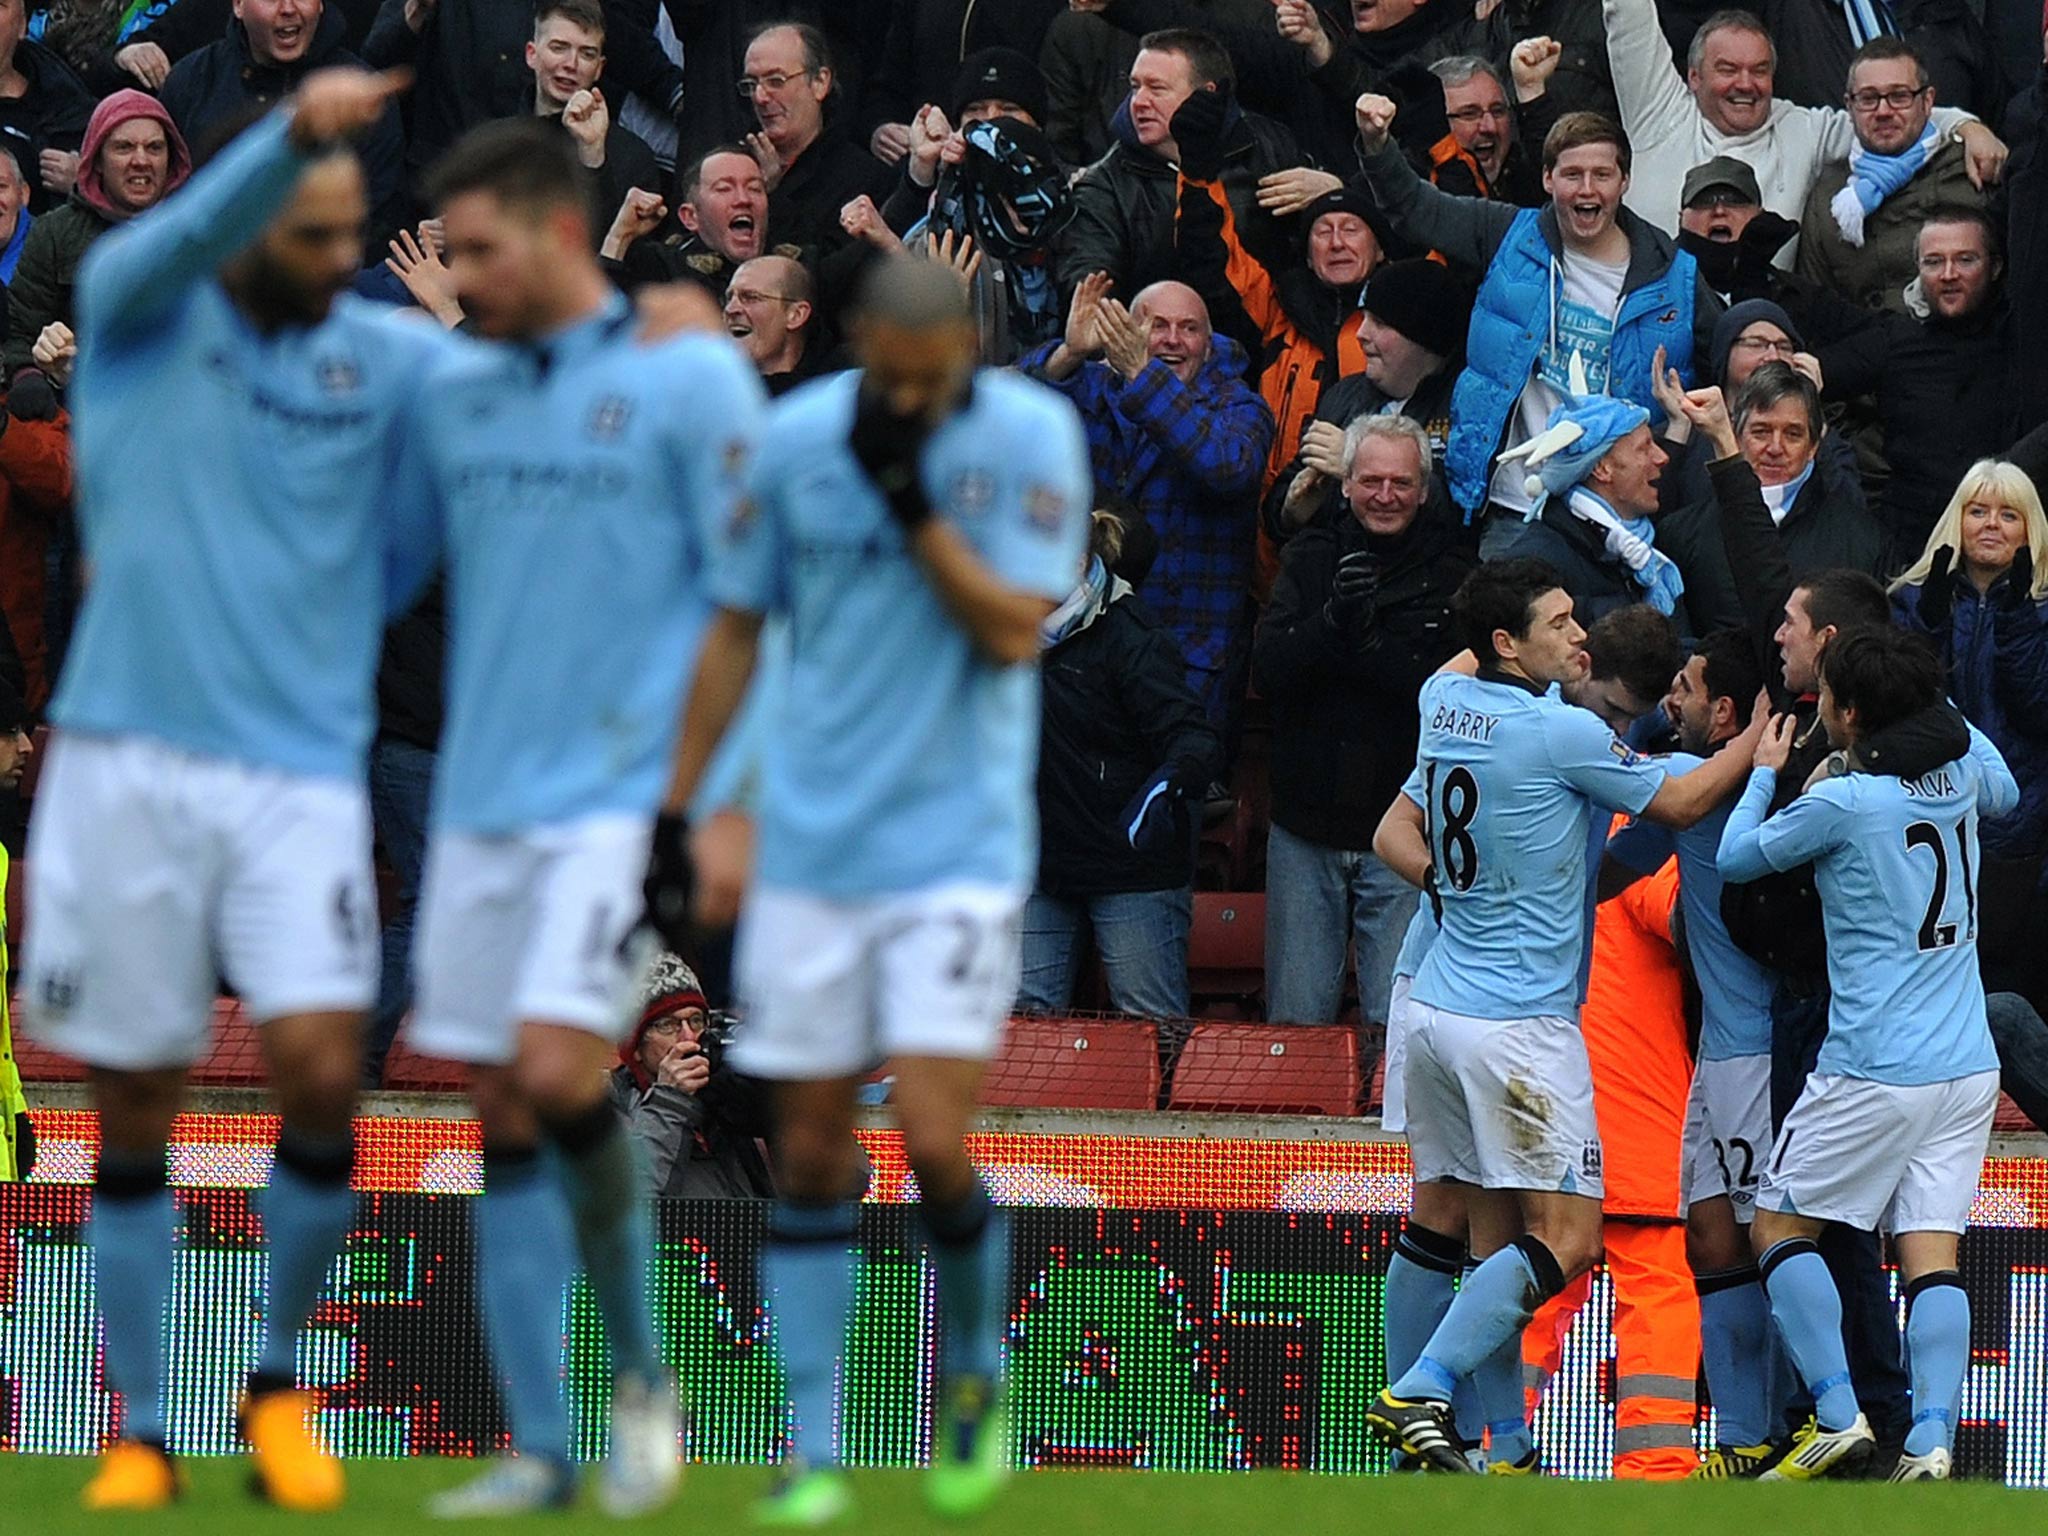 Pablo Zabaleta is congratulated on his late goal for Manchester City against Stoke